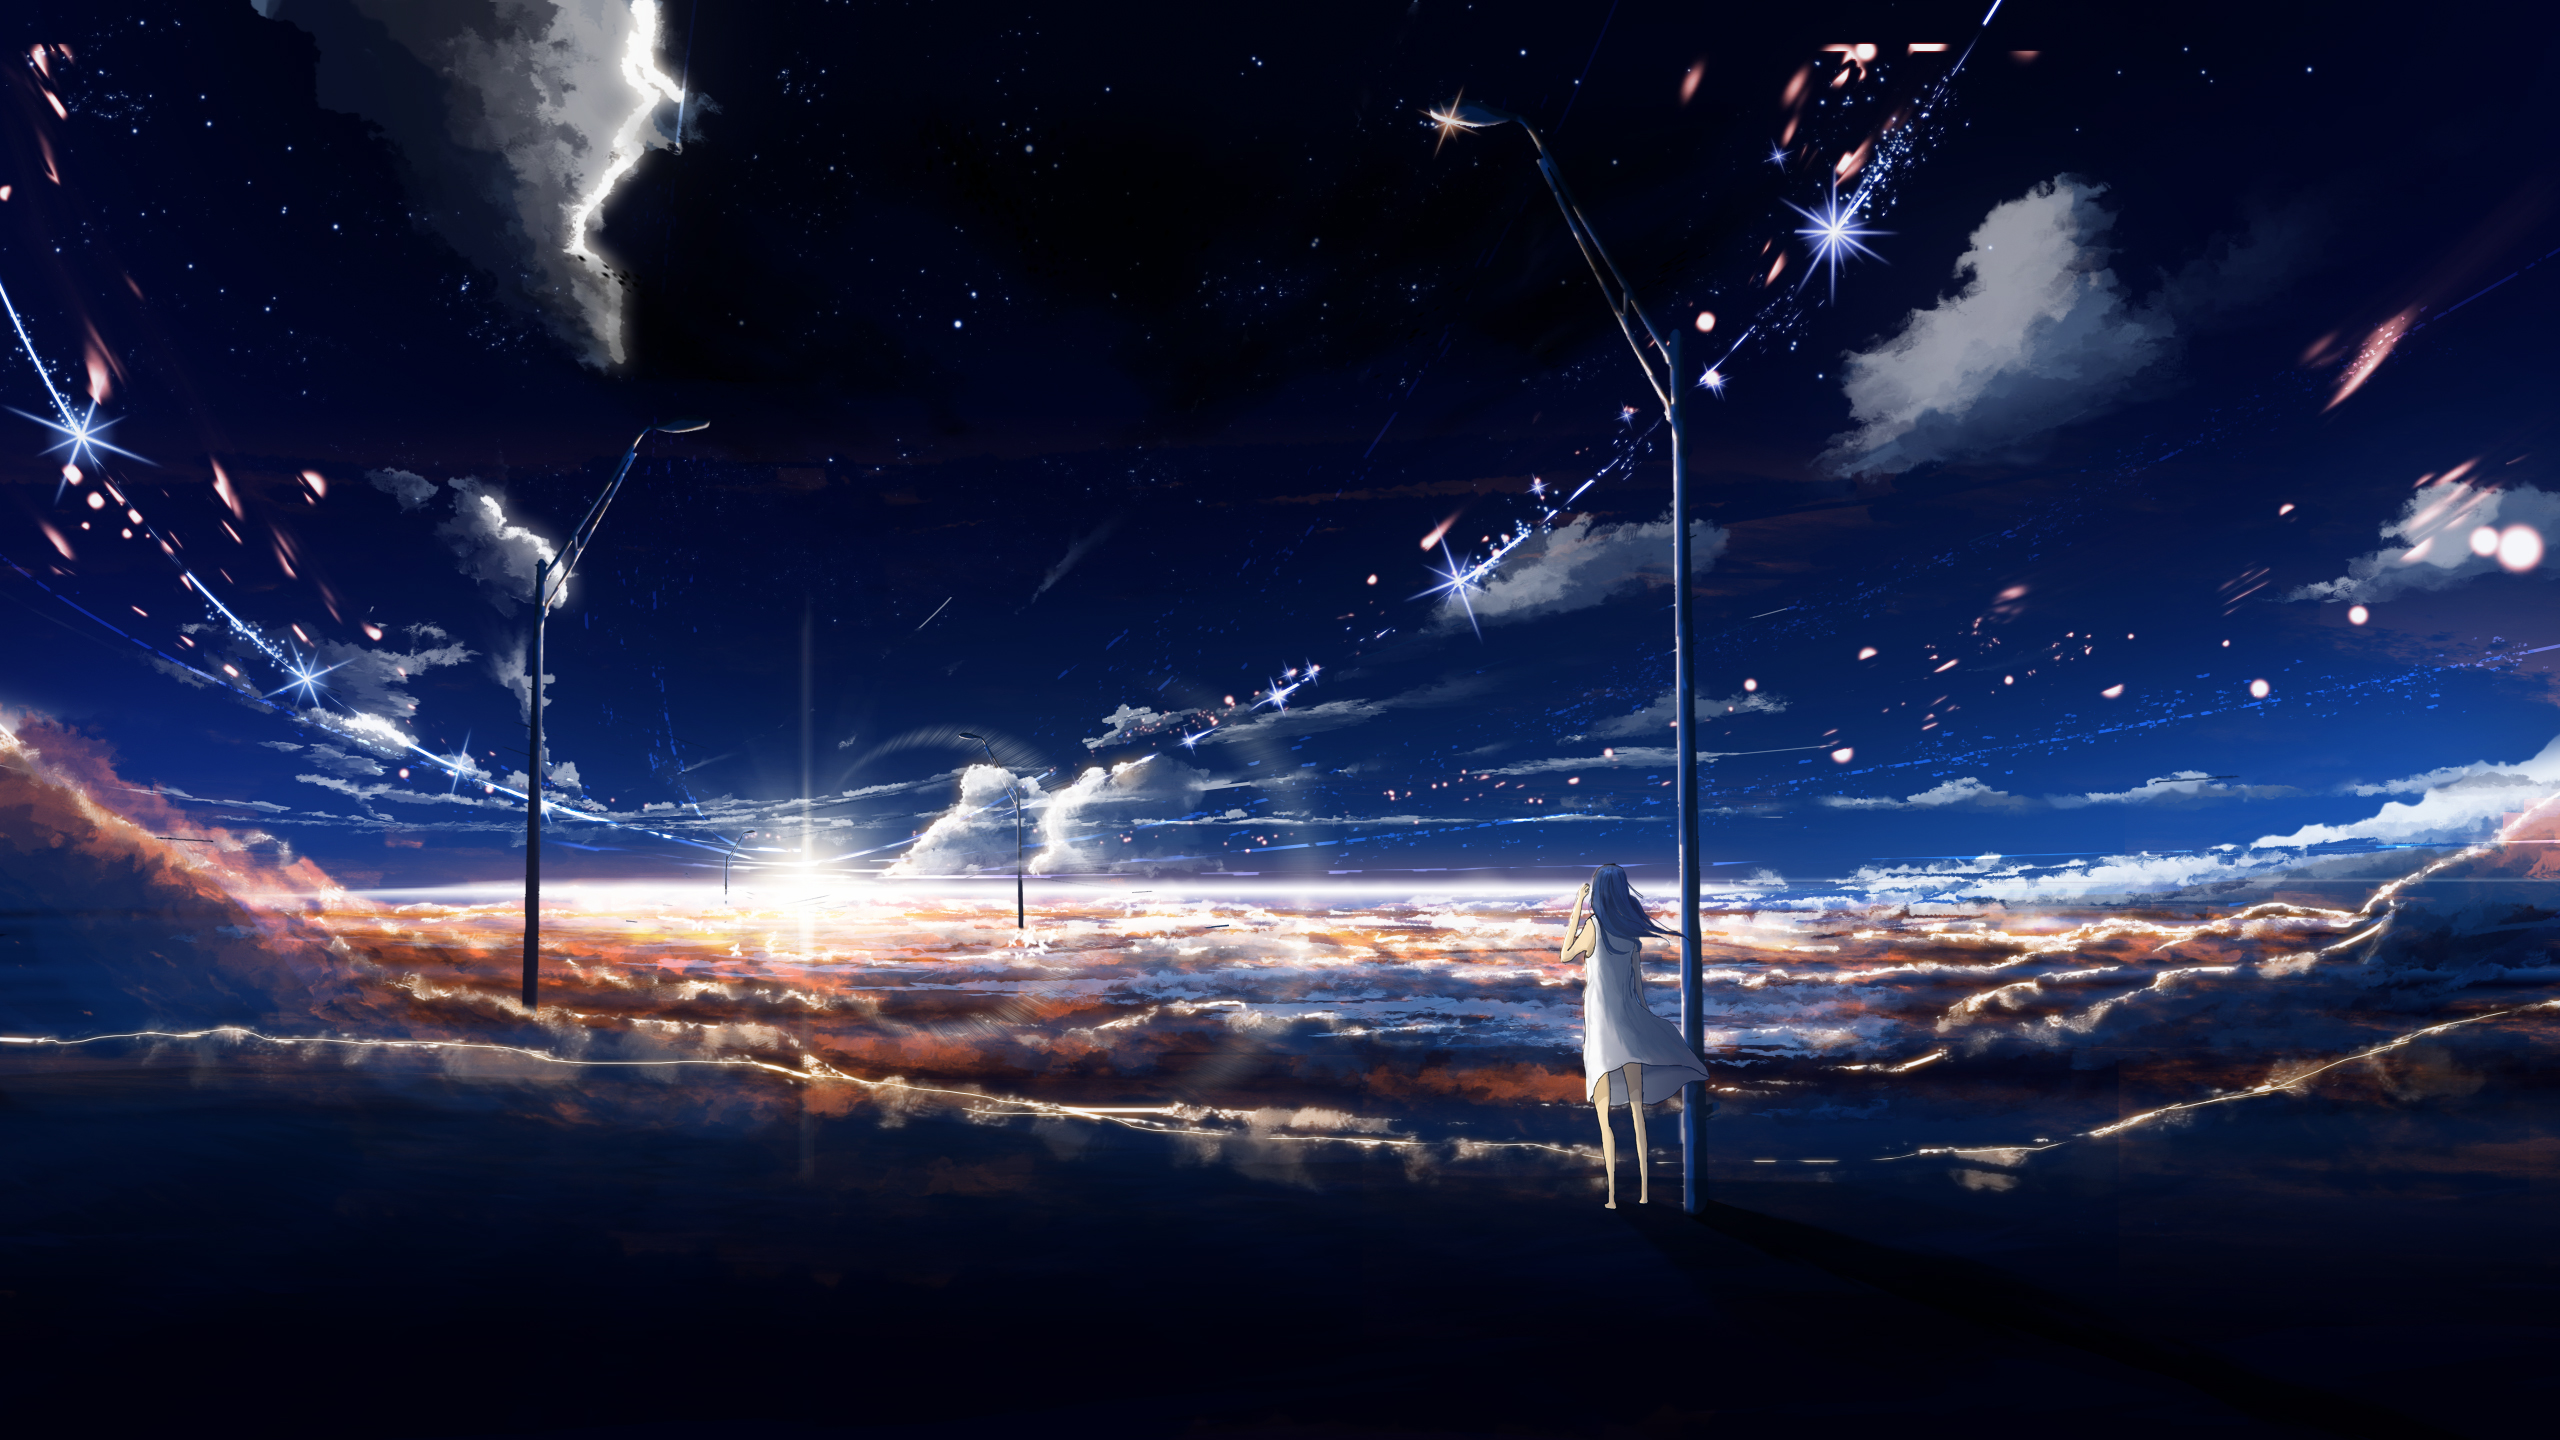 Anime Wallpapers on Twitter Field Research Evangelion 2560x1440  3840x1600 Post httpstcoliIdnMzLQE wallpaper anime animewallpaper  httpstcok8MQpHWsUh  X